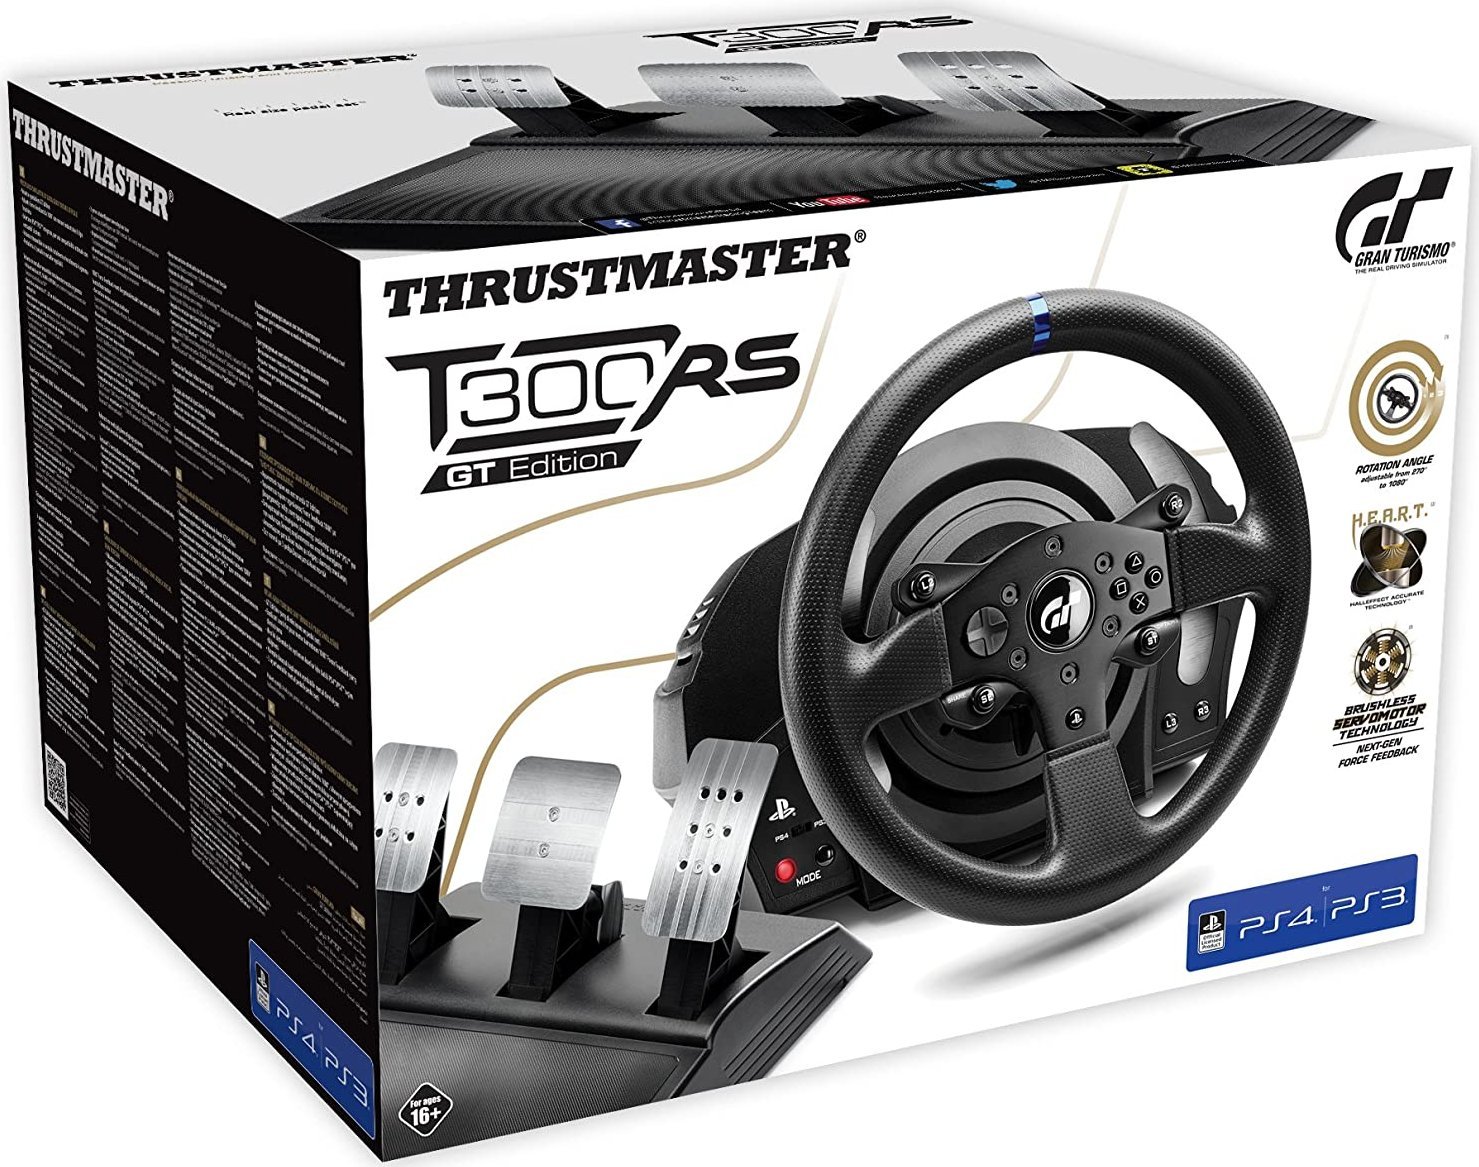 Volante+pedales Thrustmaster T300rsgt Ps3 4 (4160681) - Innova